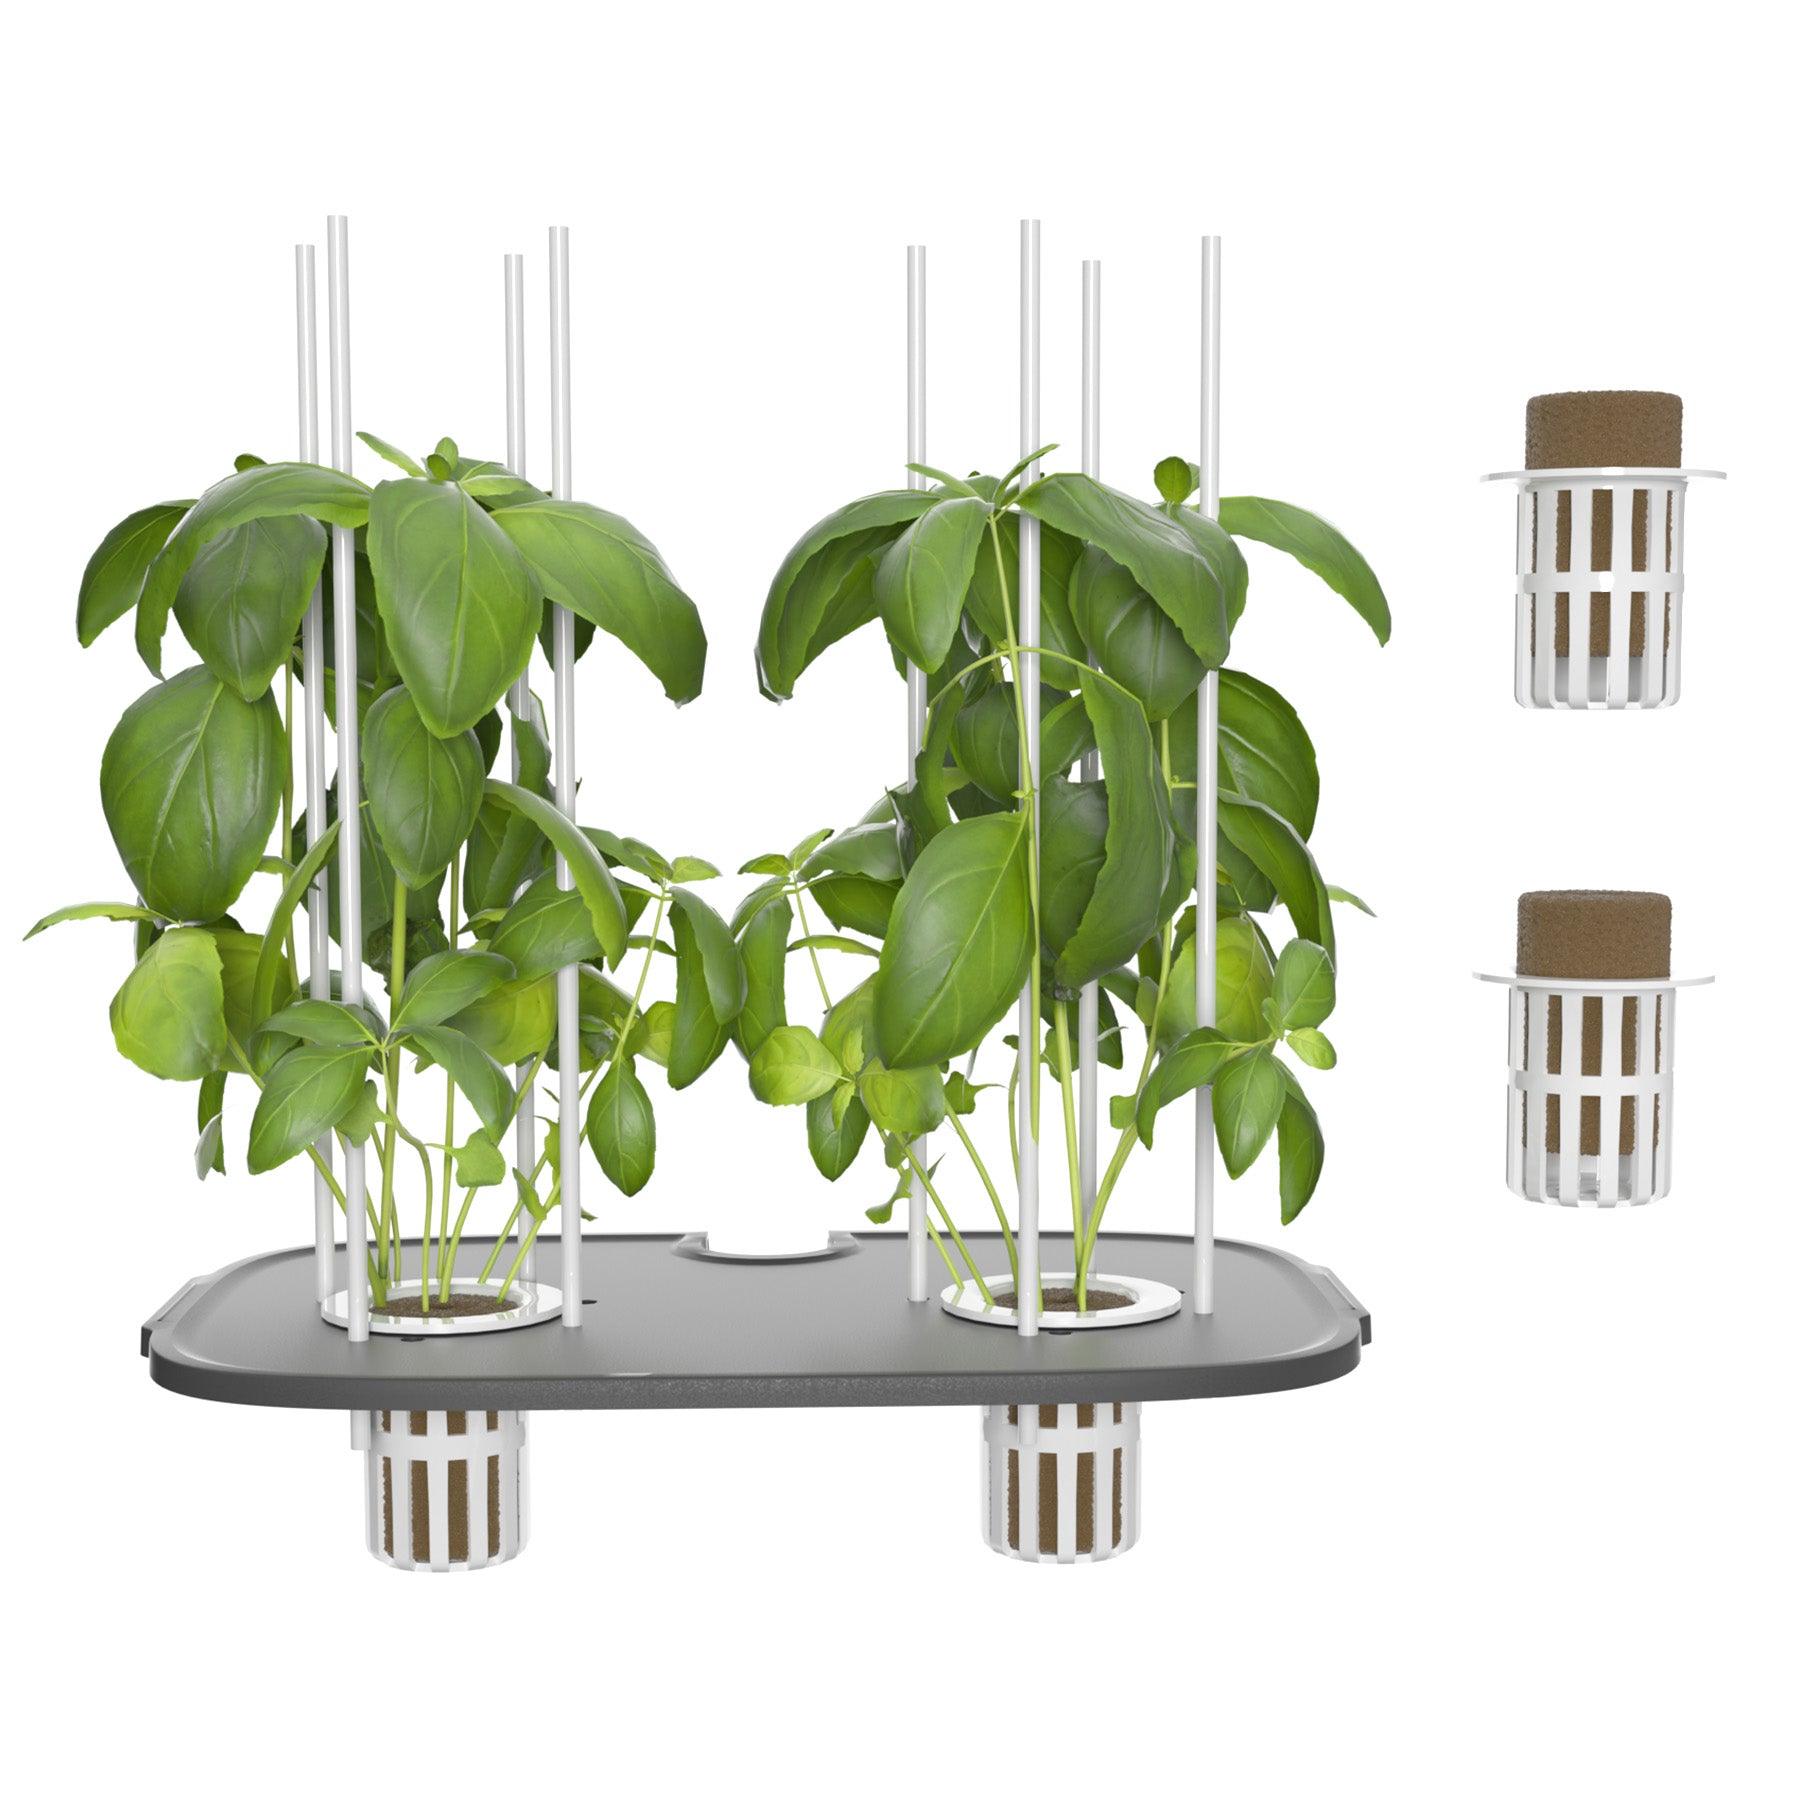 2-pod growing tray for LetPot Max hydroponic garden